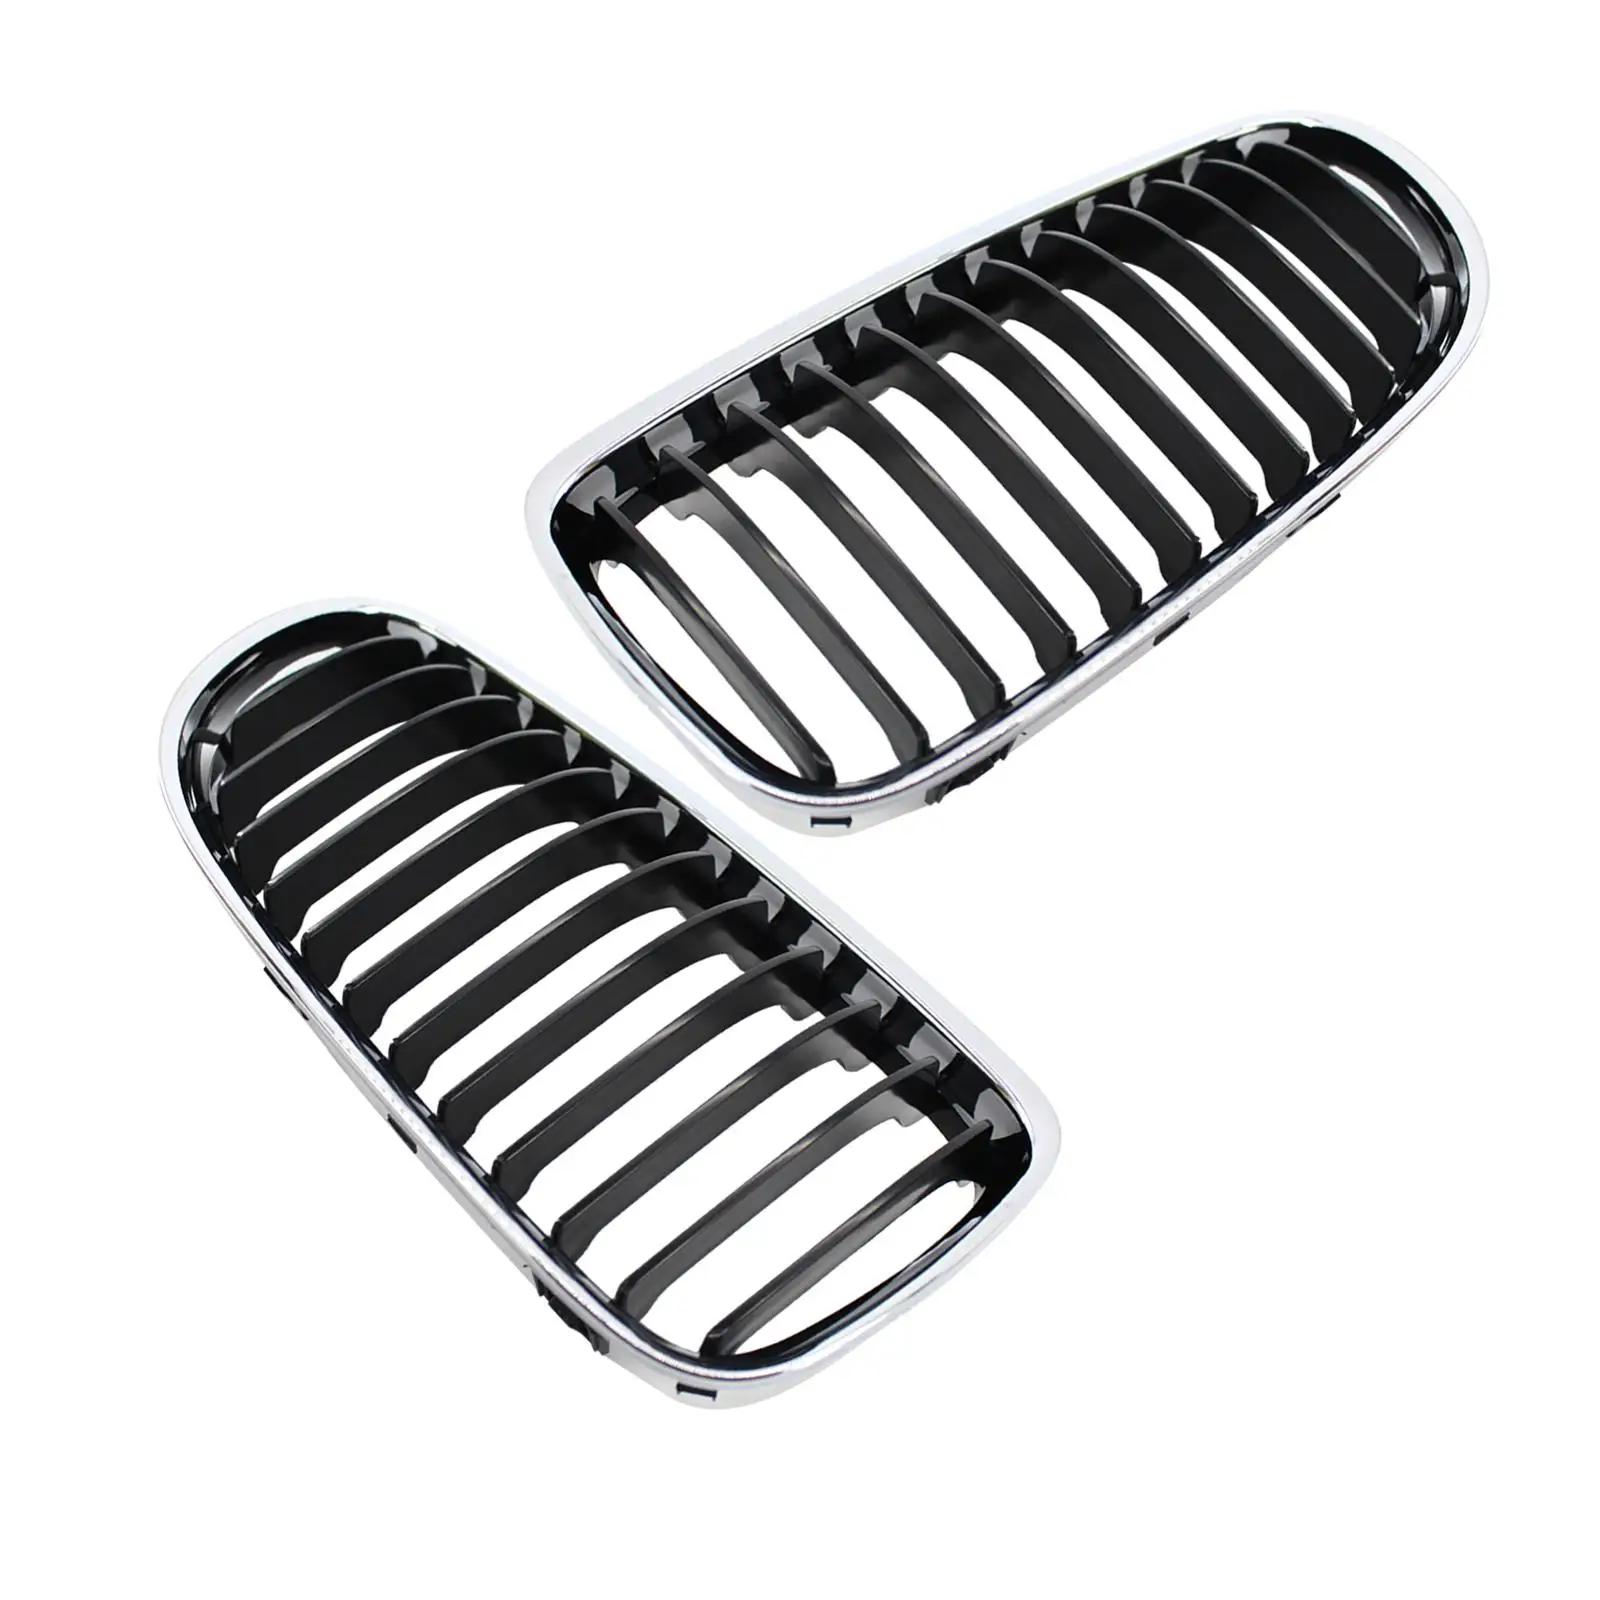 51137201969 Front Bumper Grille Frame 51137201970 for BMW E90 Lci Automotive Accessory Black High Performance